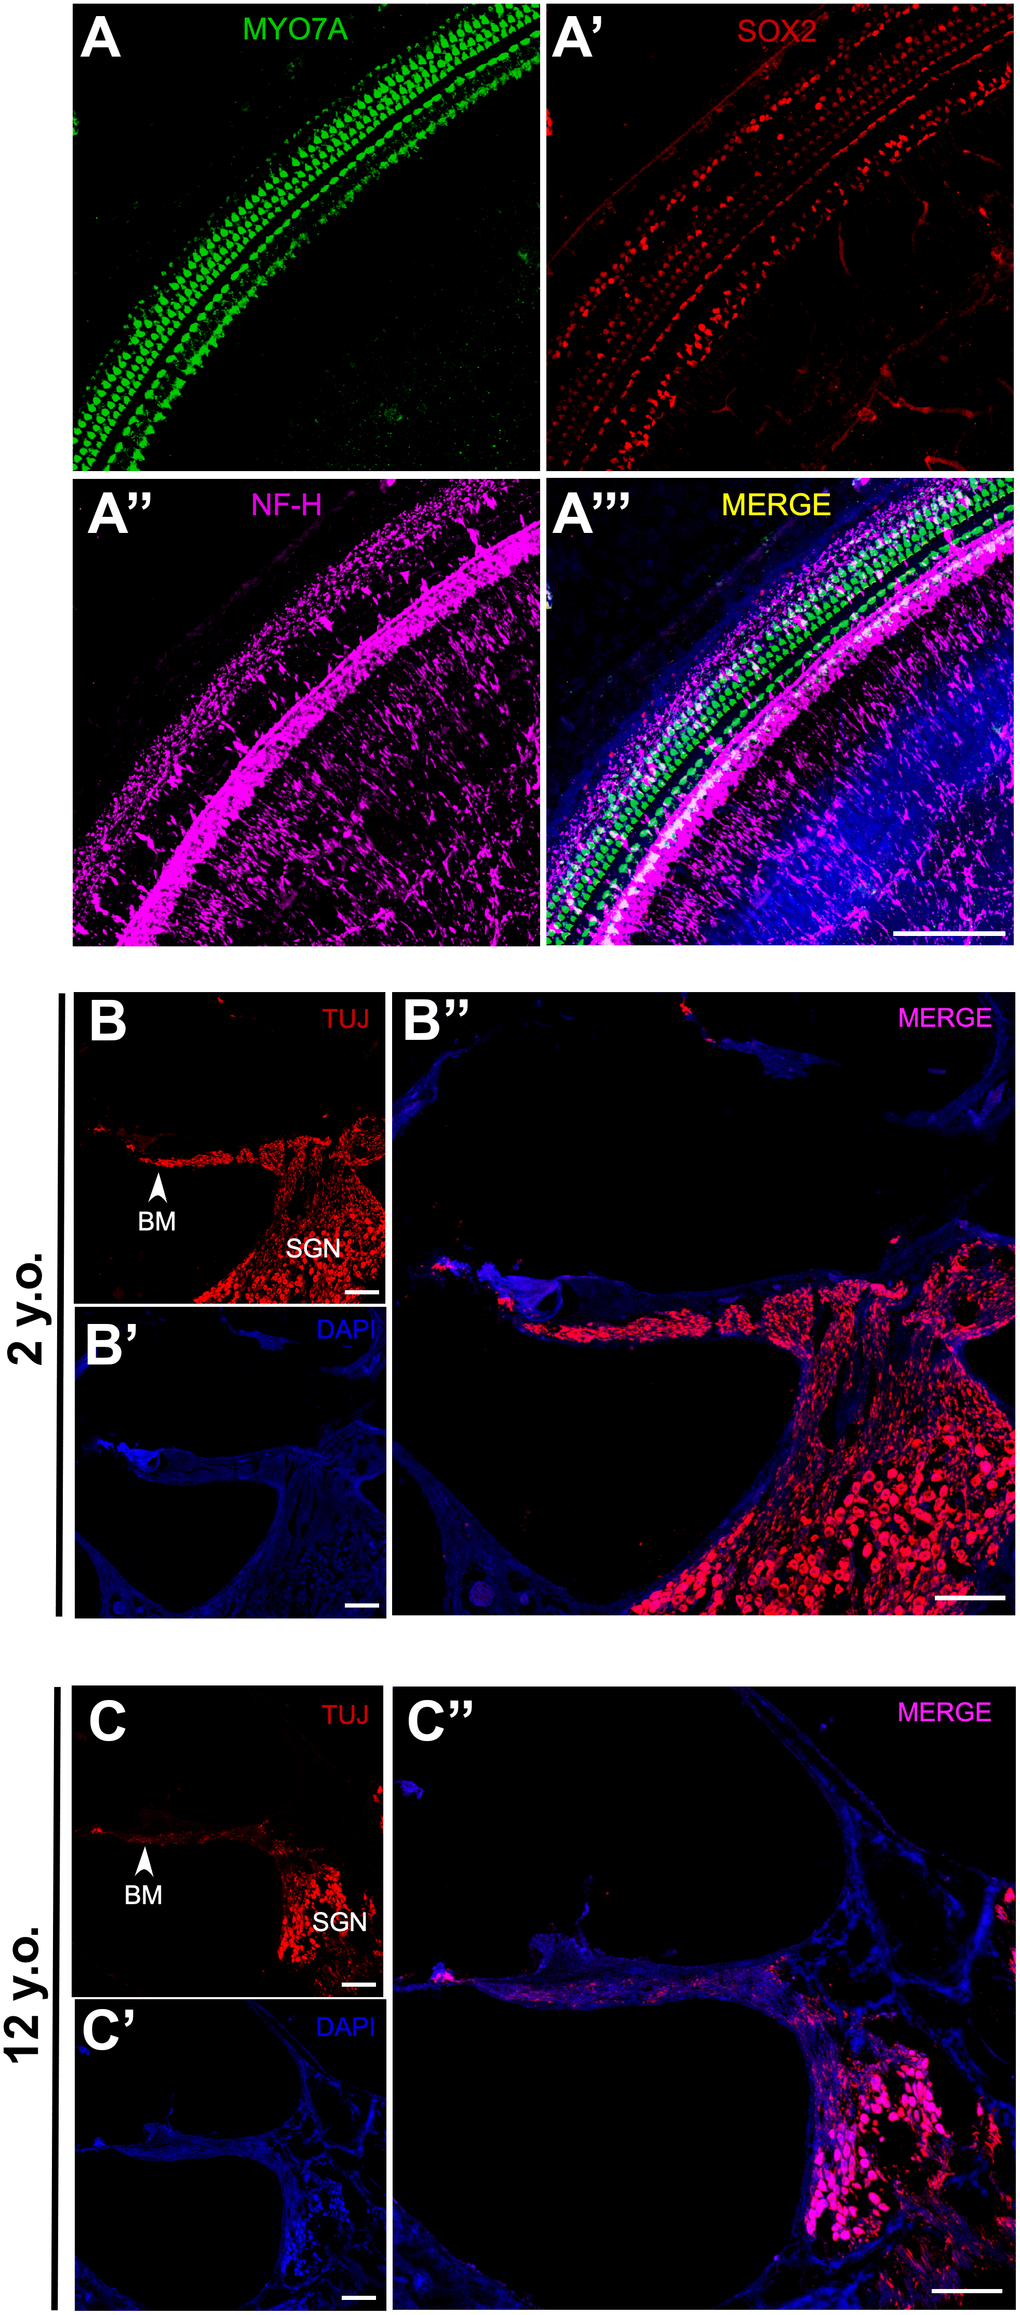 Effects of age on SGN density in marmosets. (A–A”) Confocal whole-mount immunofluorescence images of the middle turn of a cochlea in a 2-year-old marmoset. (A) Hair cells labeled with MYO7A. (A’) Supporting cells positive for SOX2. (A”) Neural fibers labeled with NF-H. (A”’) Merged channels figure, MYO7A (green), SOX2 (red), NF-H (magenta), DAPI (blue). (B–B”) Confocal images of a cochlear cryosection from a 2-year-old marmoset. SGNs labeled with TUJ. TUJ-positive neurofilaments connect the basilar membrane (BM) to the modiolus. (C–C”) Confocal images of a cochlear cryosection from a 12-year-old marmoset. Scale bar: 100 μm.